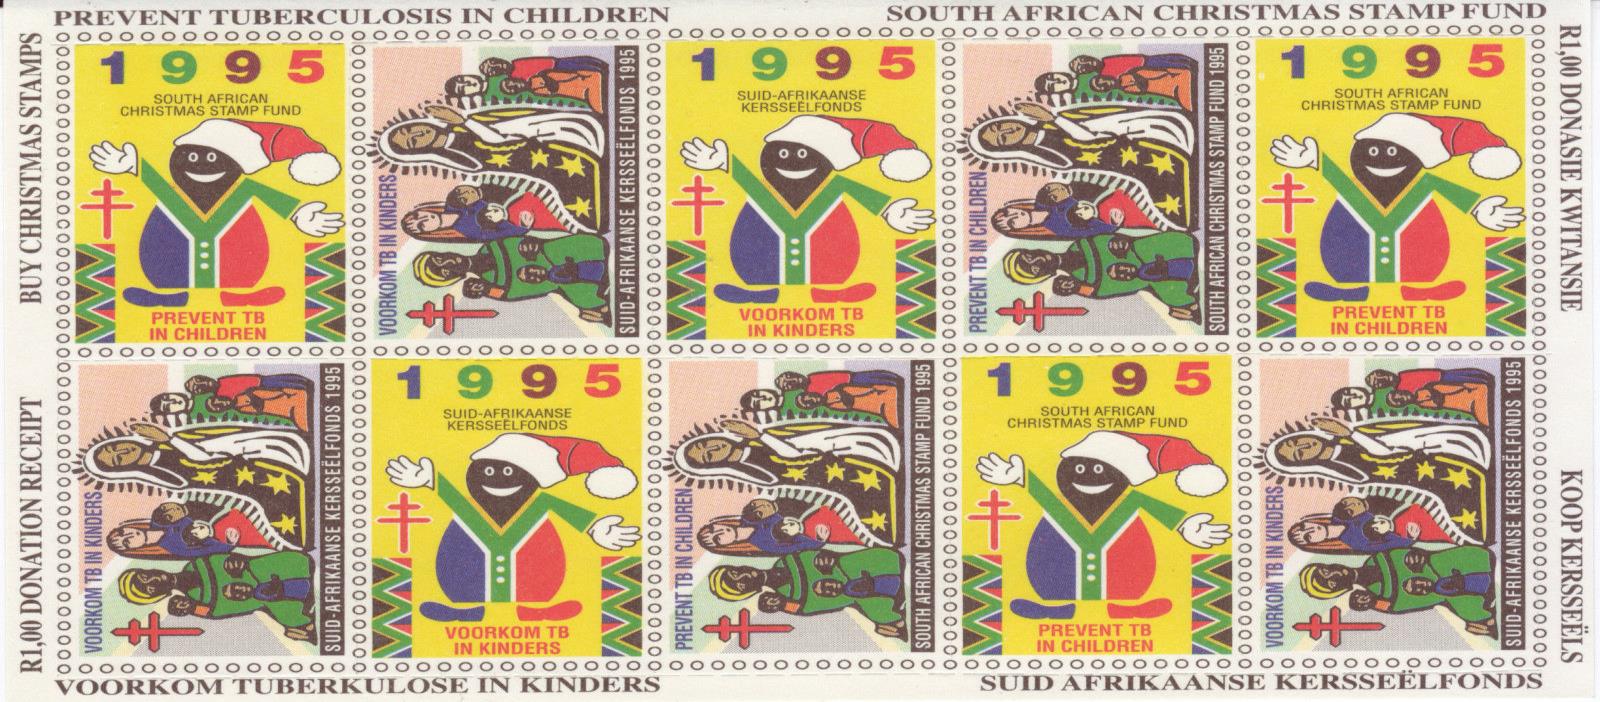 South Africa #70 TB Christmas Seal